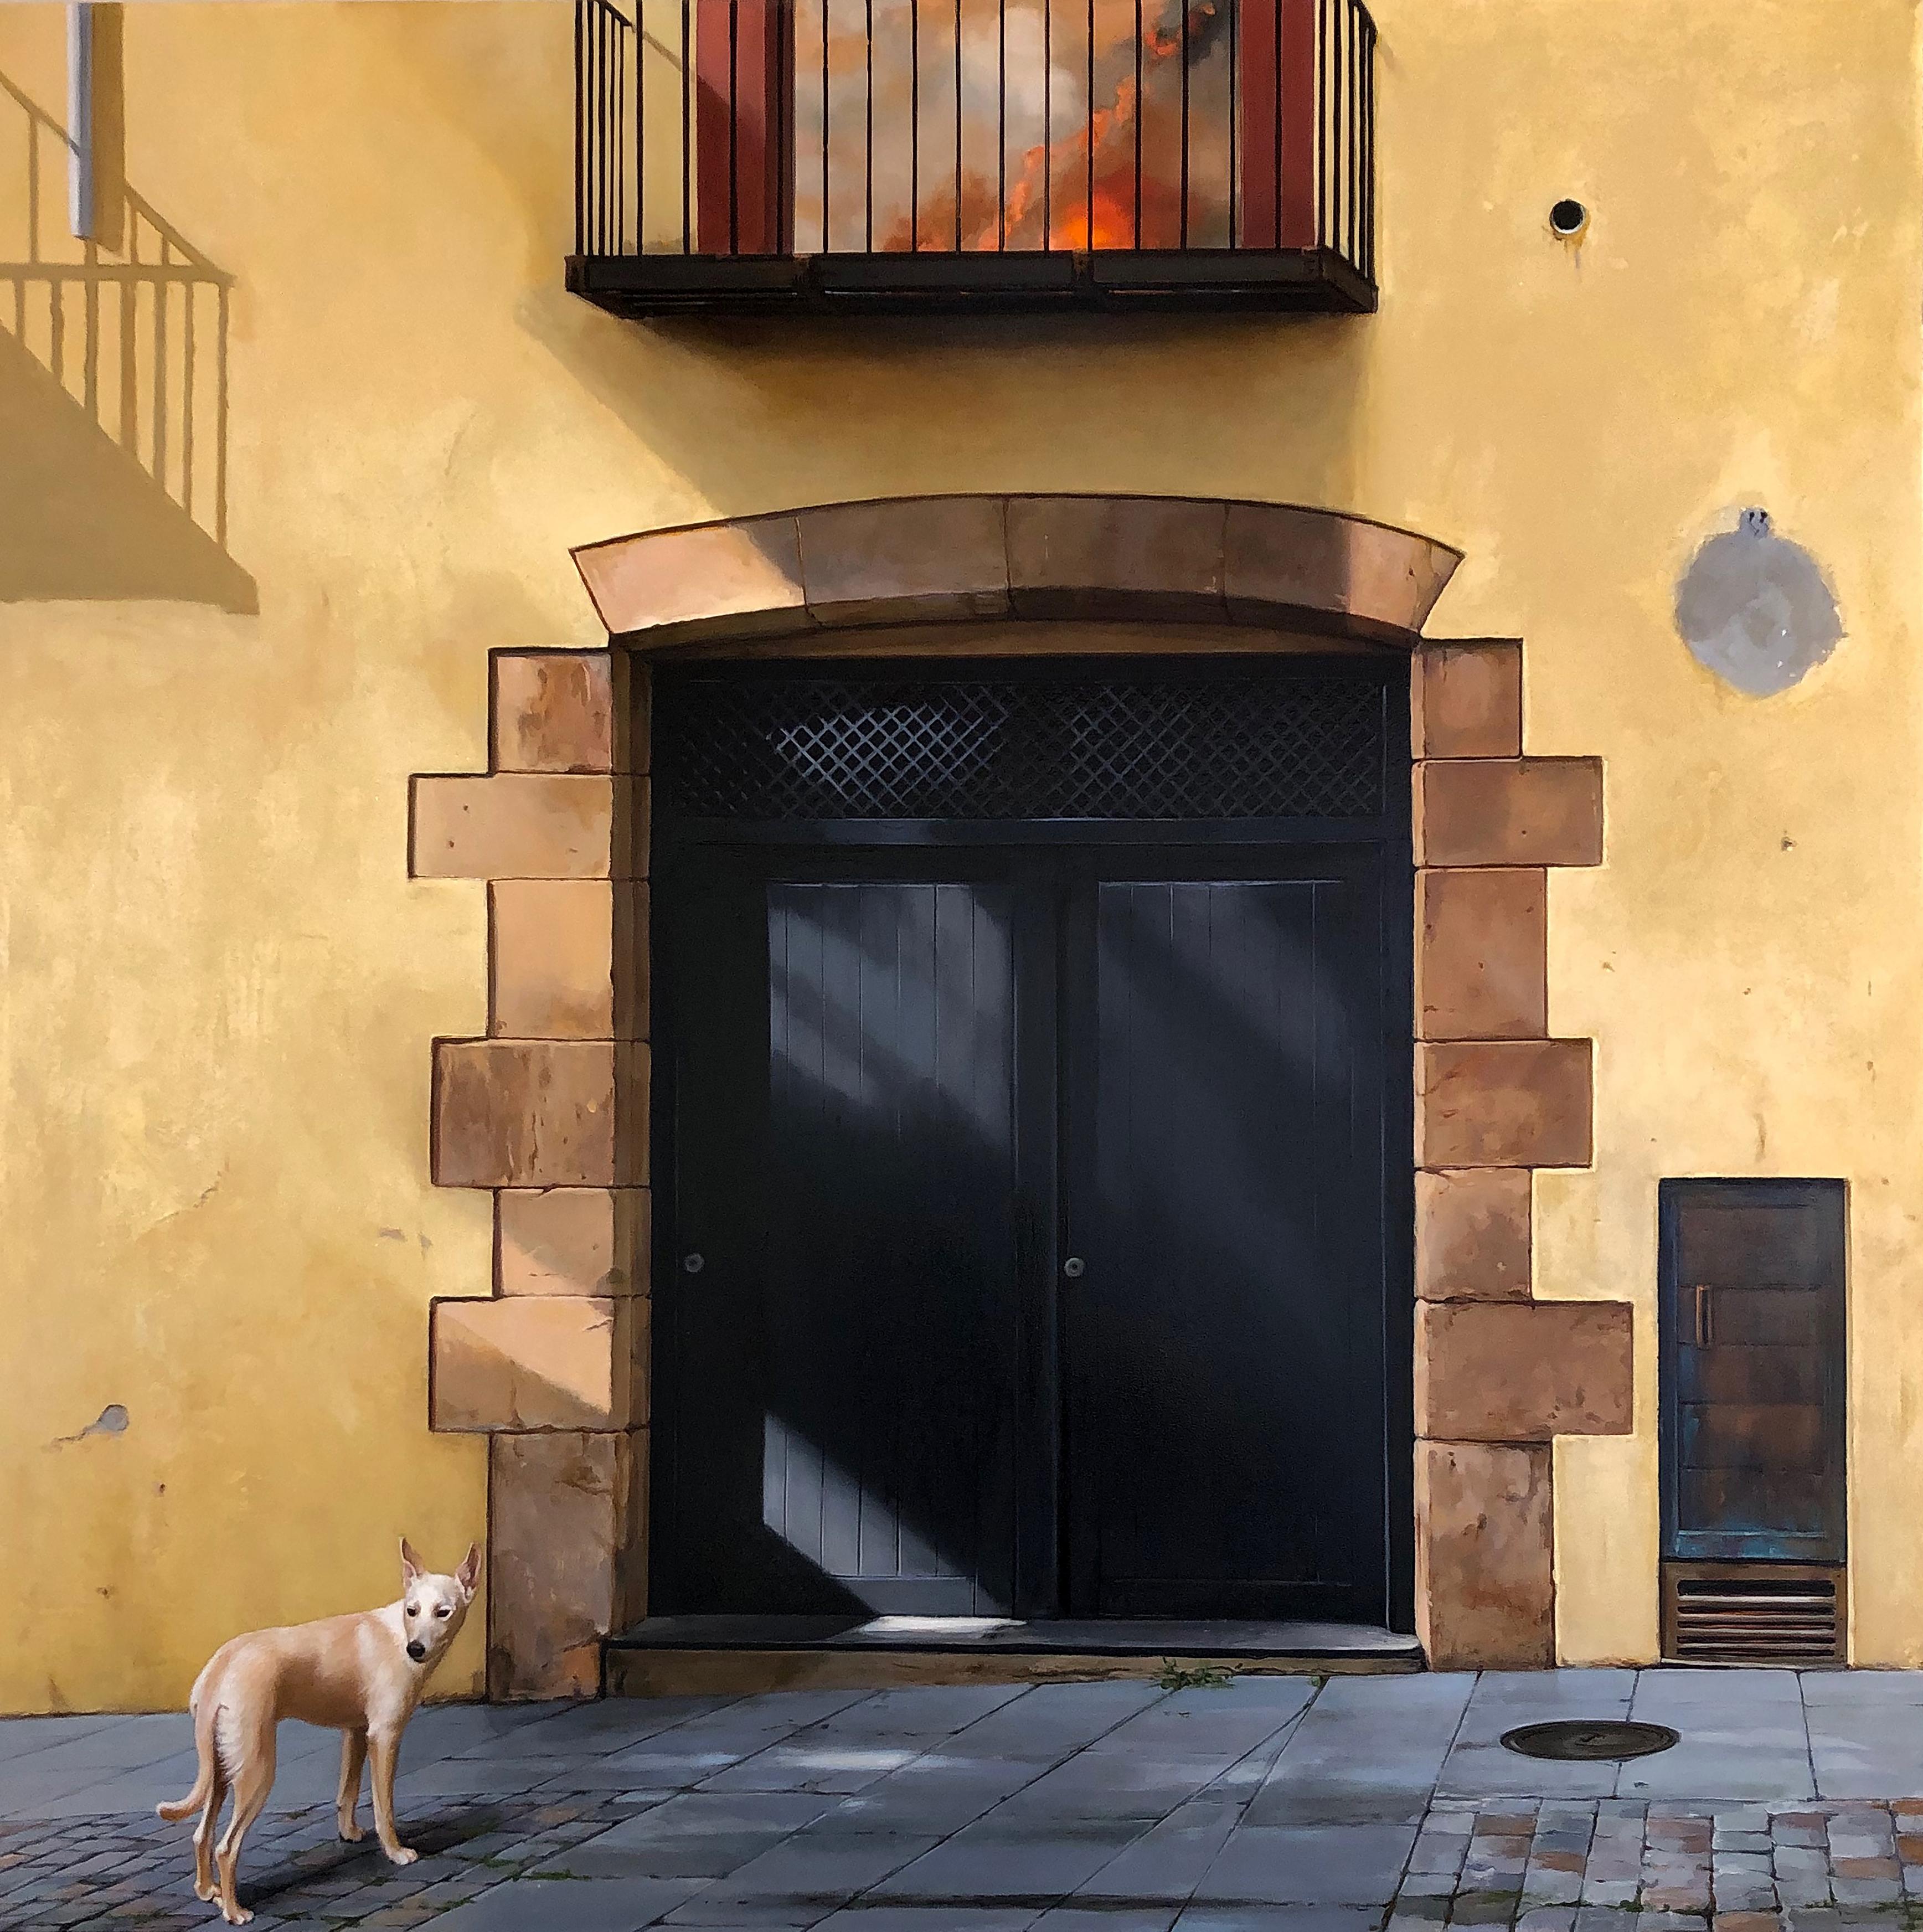 Carol Pylant Animal Painting - Sombras des Caldes (The Shadows of Caldes) - Architectural Imagery and a Dog 